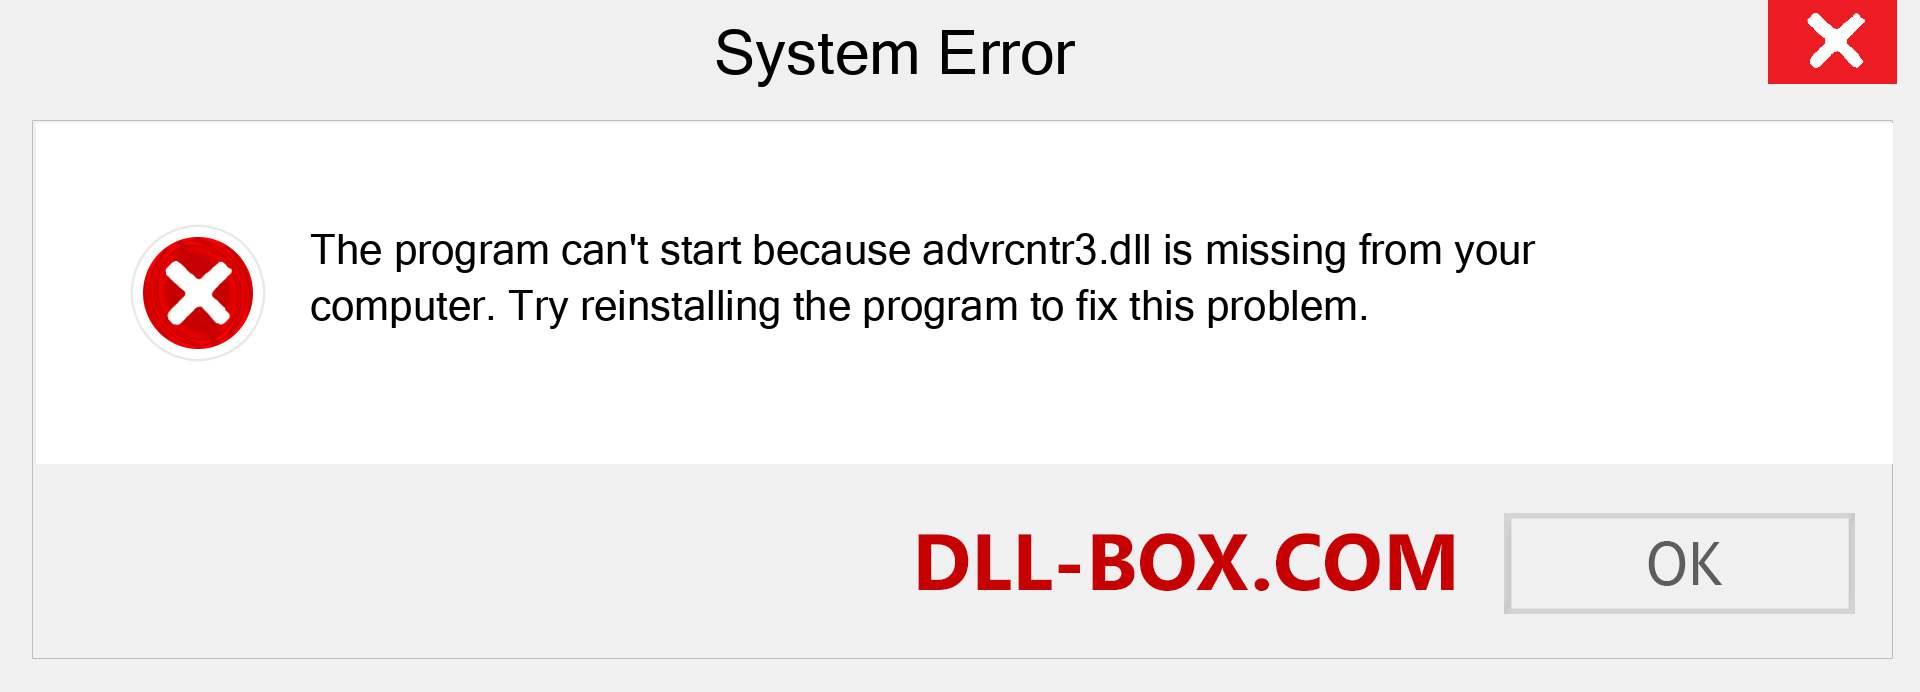  advrcntr3.dll file is missing?. Download for Windows 7, 8, 10 - Fix  advrcntr3 dll Missing Error on Windows, photos, images